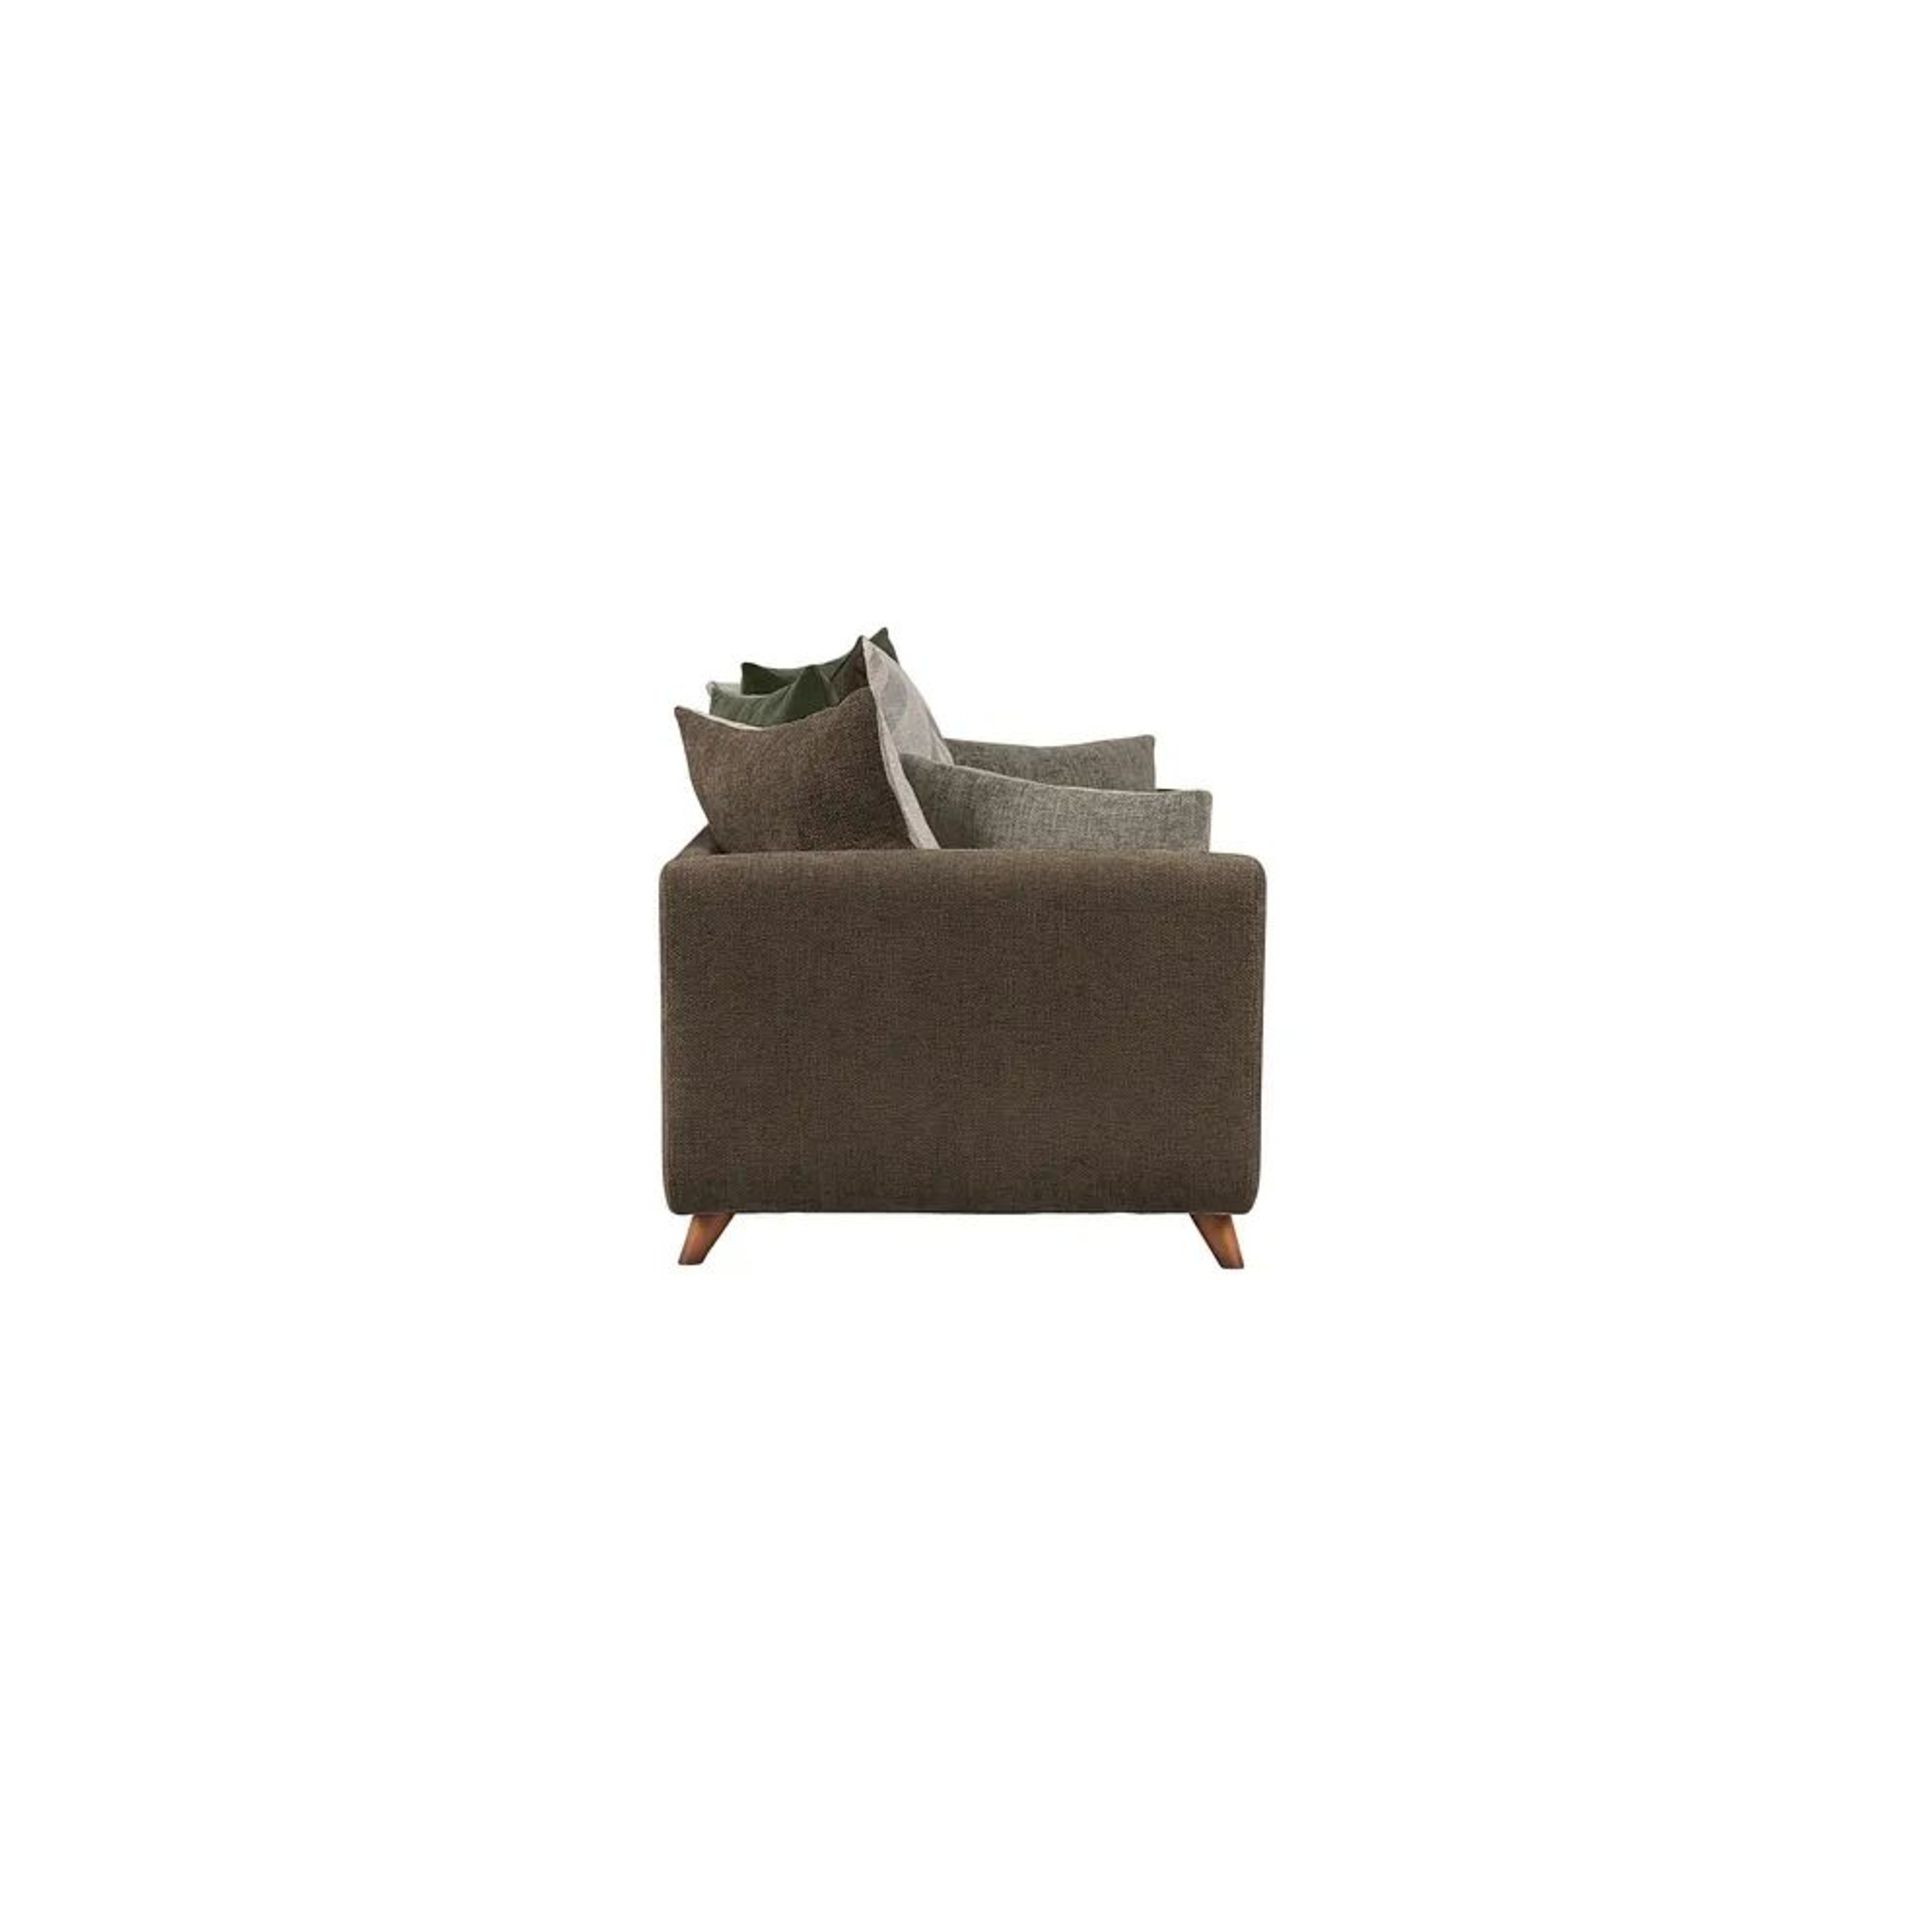 BRAND NEW WILLOUGHBY 4 Seater Pillow Back Sofa - COCOA FABRIC. RRP £1799. Our Willoughby 4-seater - Image 4 of 7